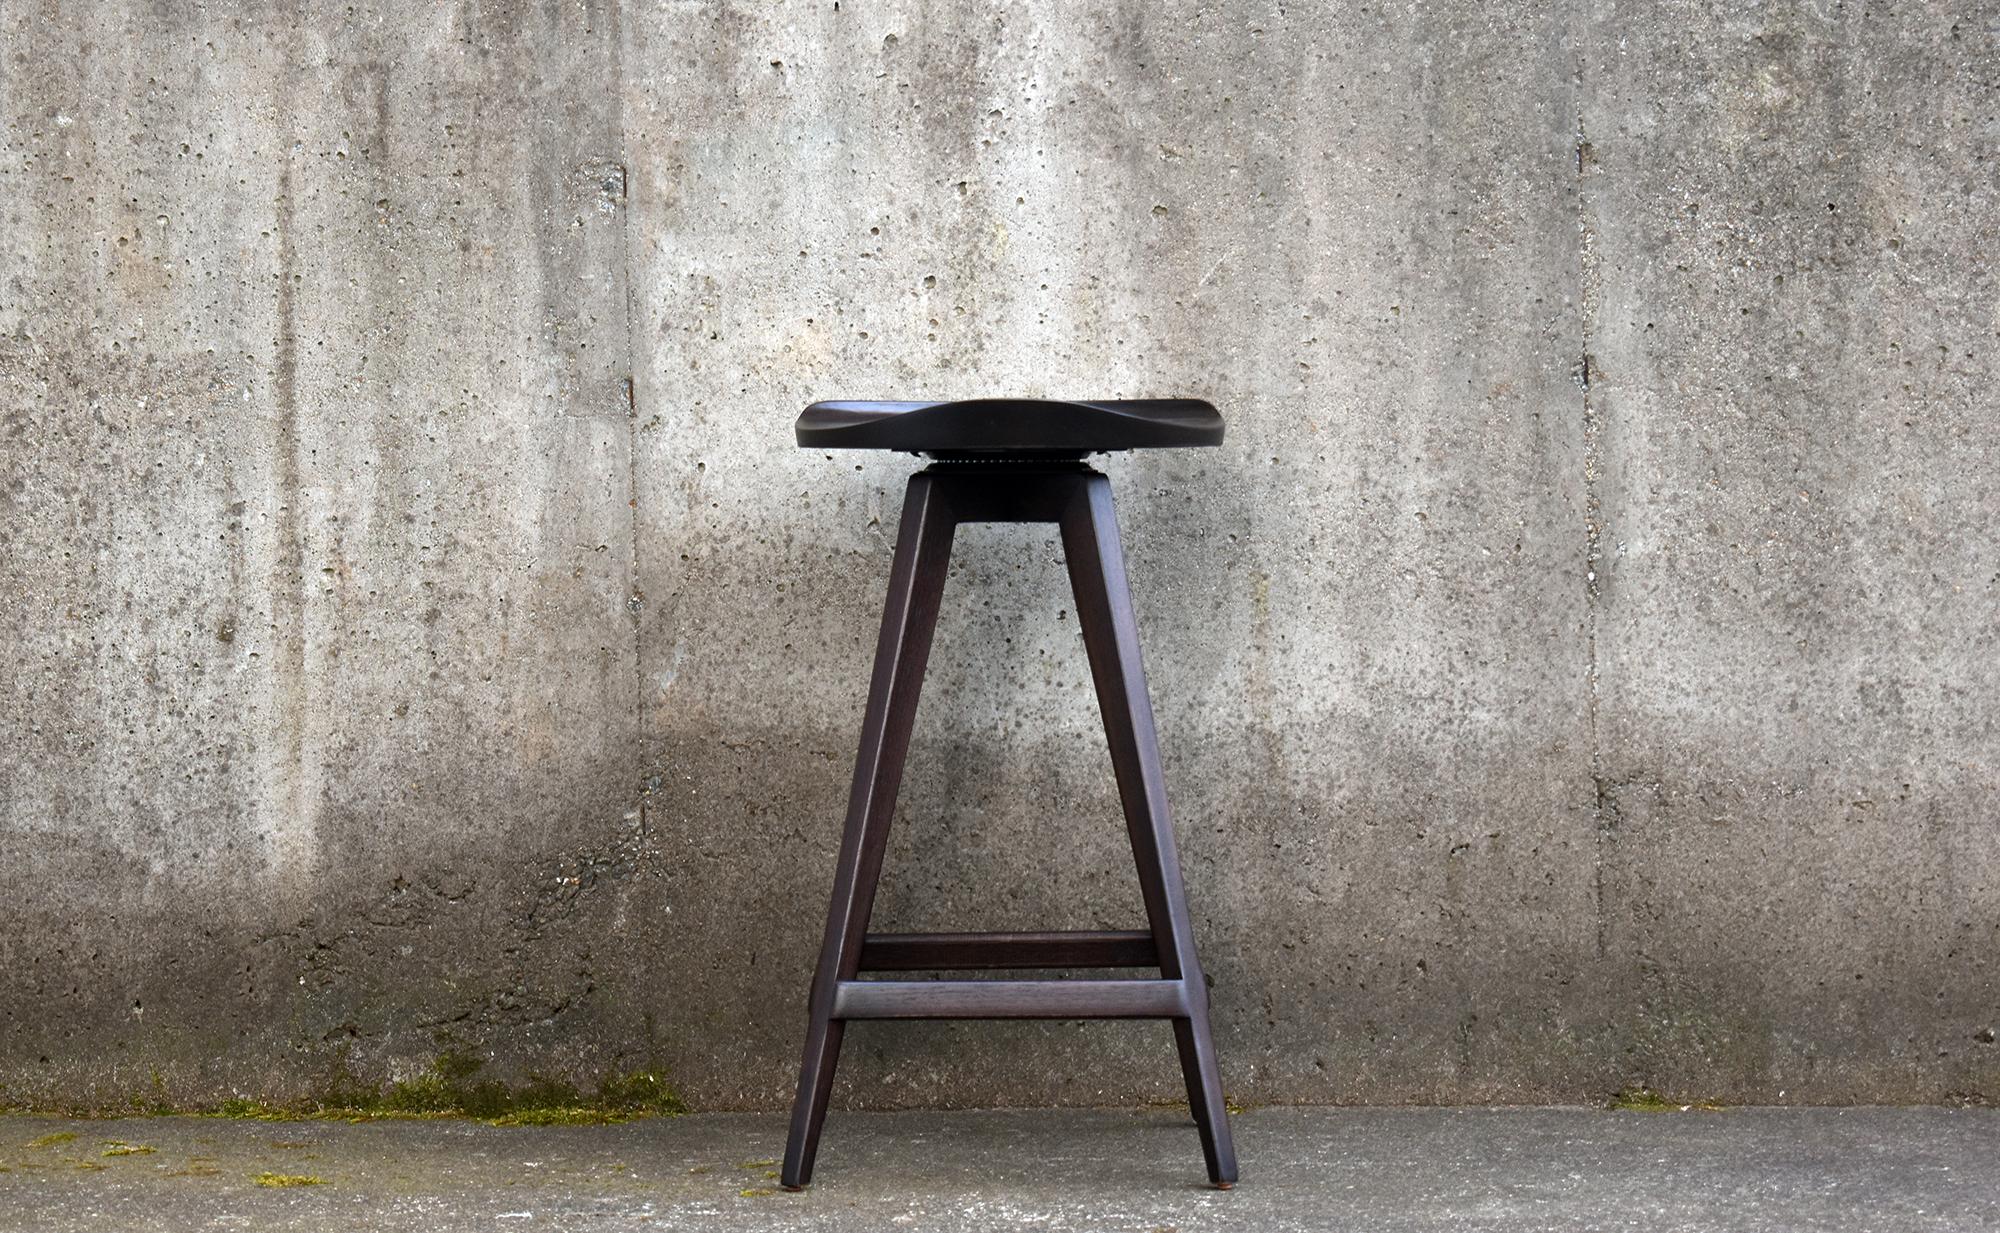 Mid-Century Modern swiveling stool with hand-sculpted low-profile backrest and tractor-style seat. 

The frame is built using mortise and tenon construction. The seat and backrest are formed by carefully selecting thick blocks of lumber which are